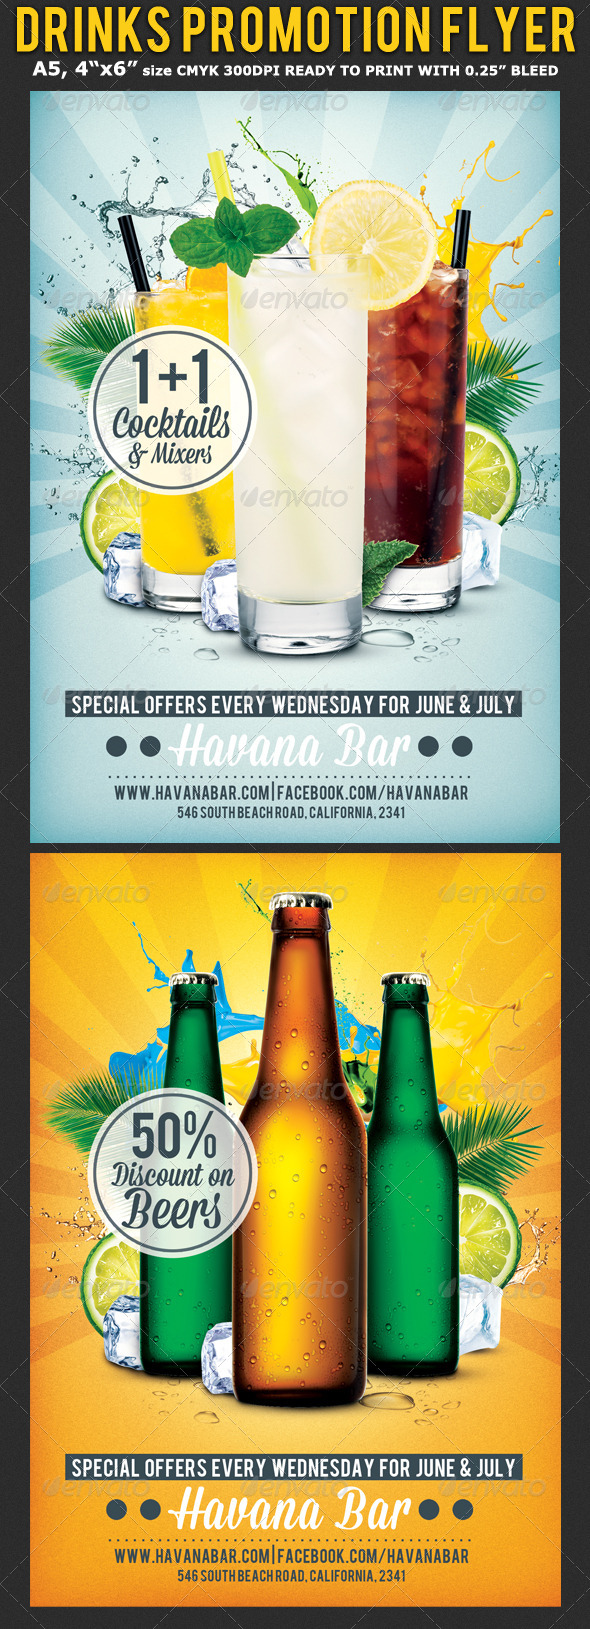 Drinks Promotion Advertising Flyer Template